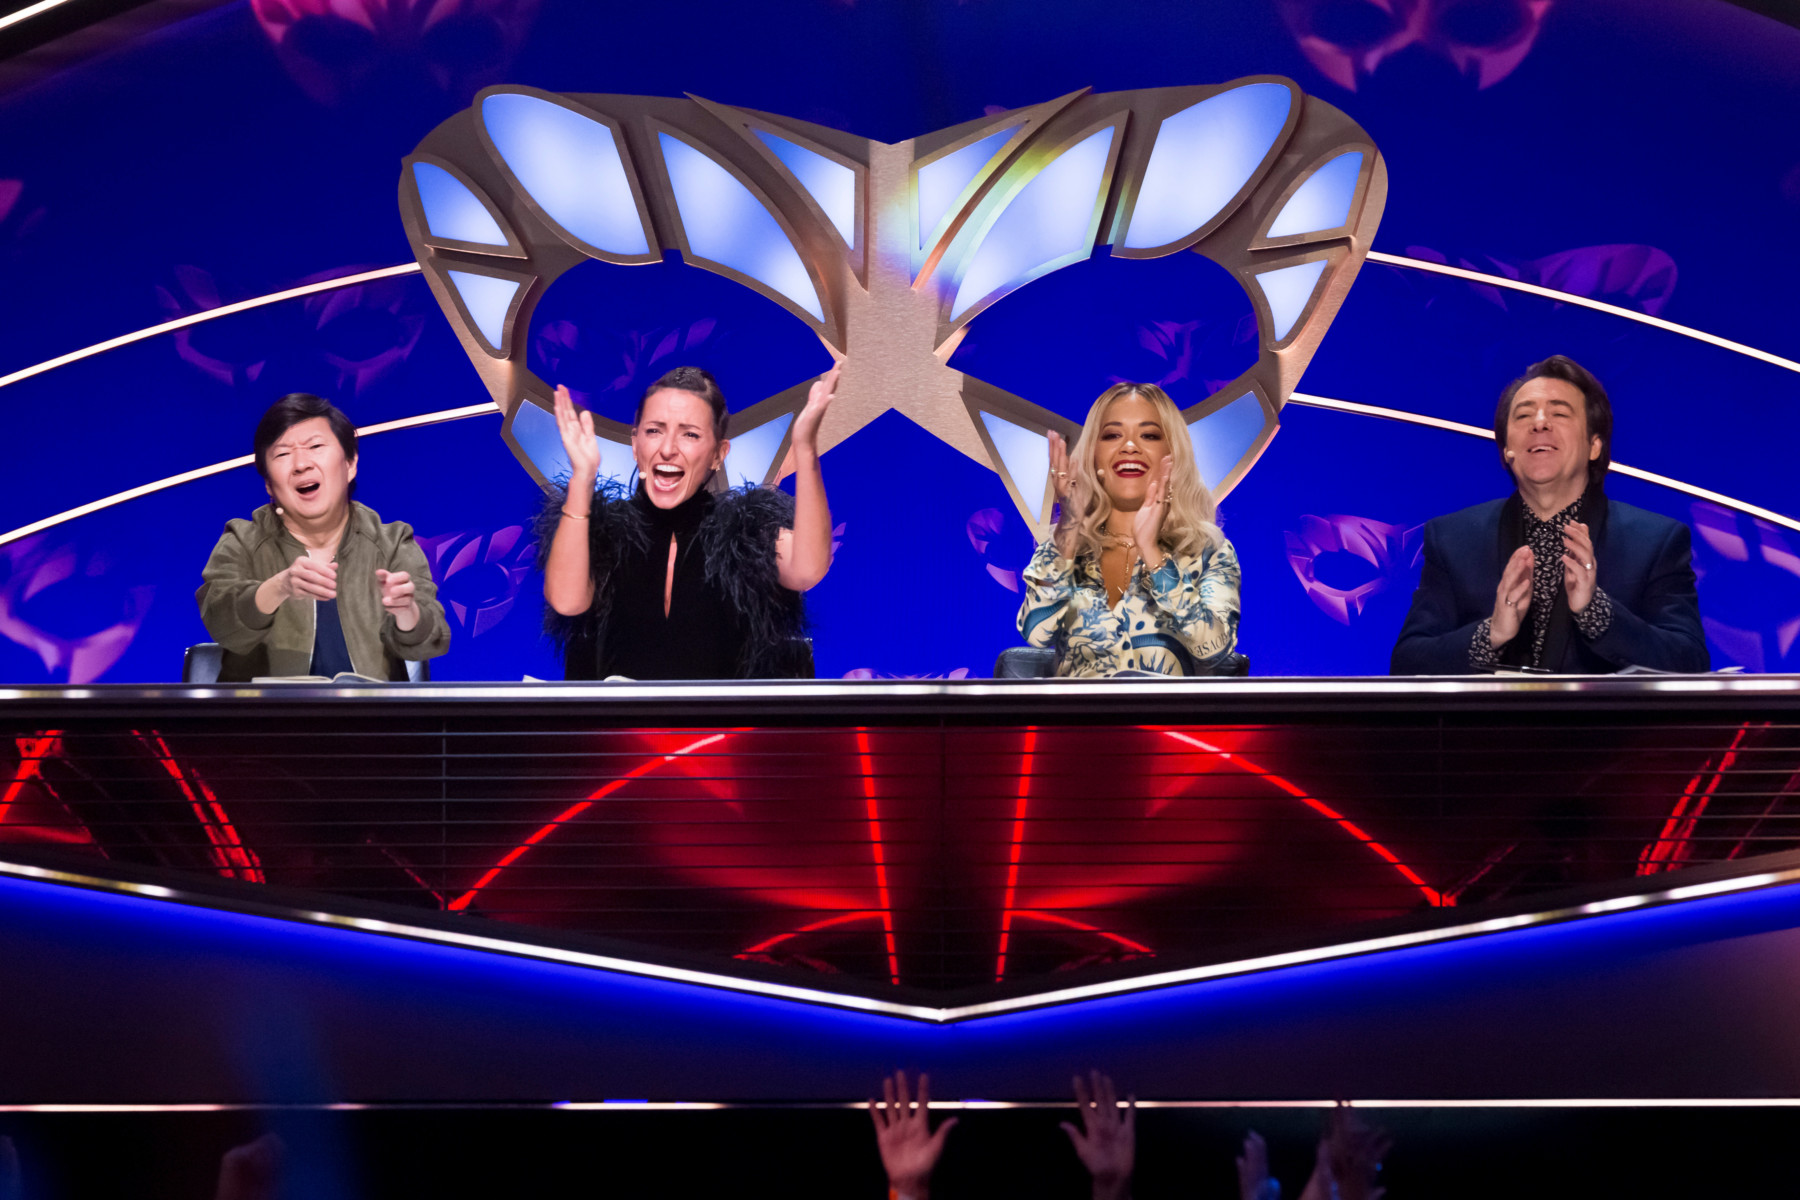 The Masked Singer final will take place in February with judges Ken Jeong, Davina McCall, Rita Ora and Jonathan Ross